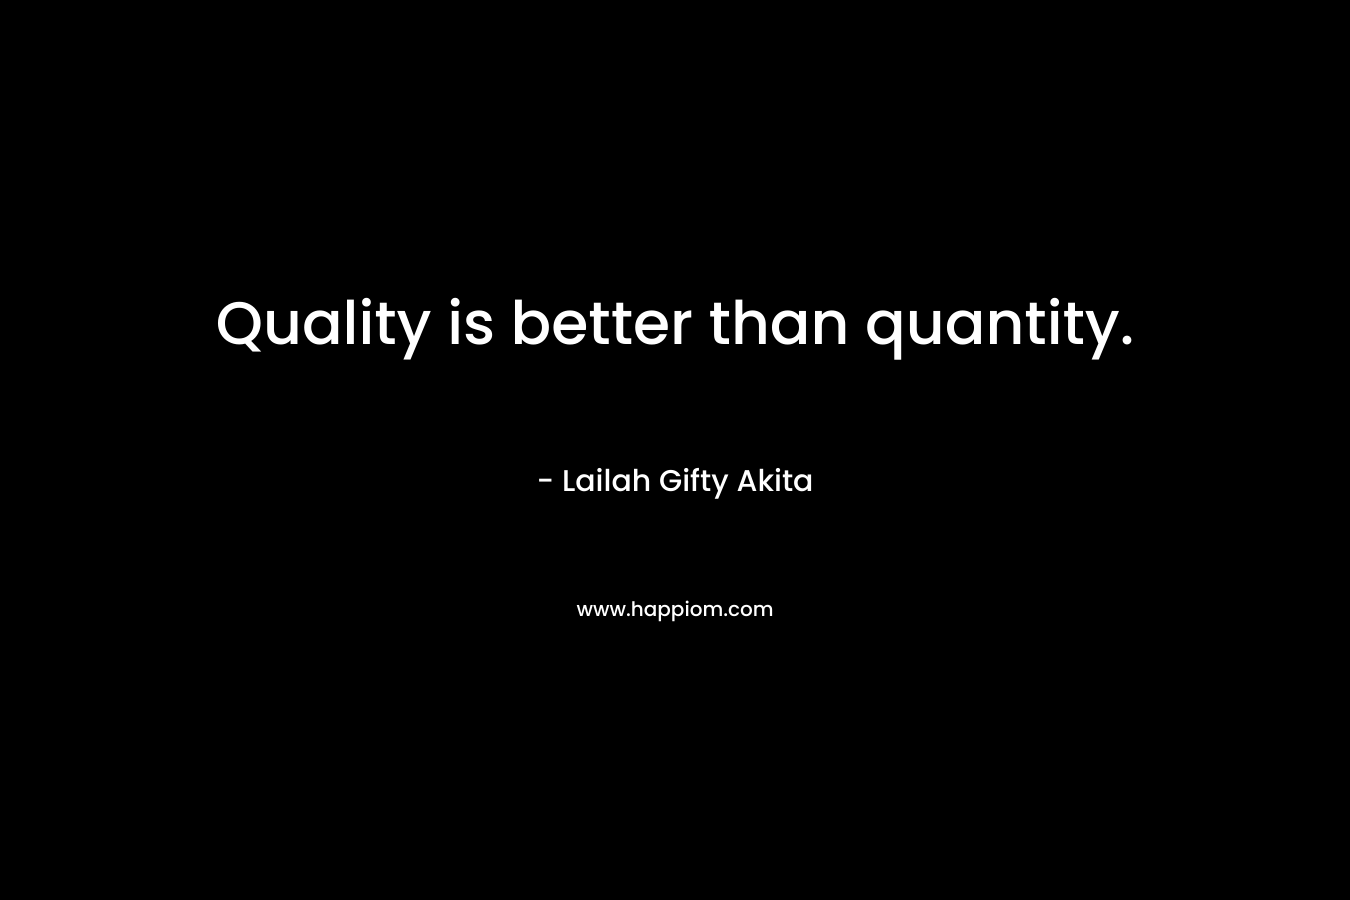 Quality is better than quantity.